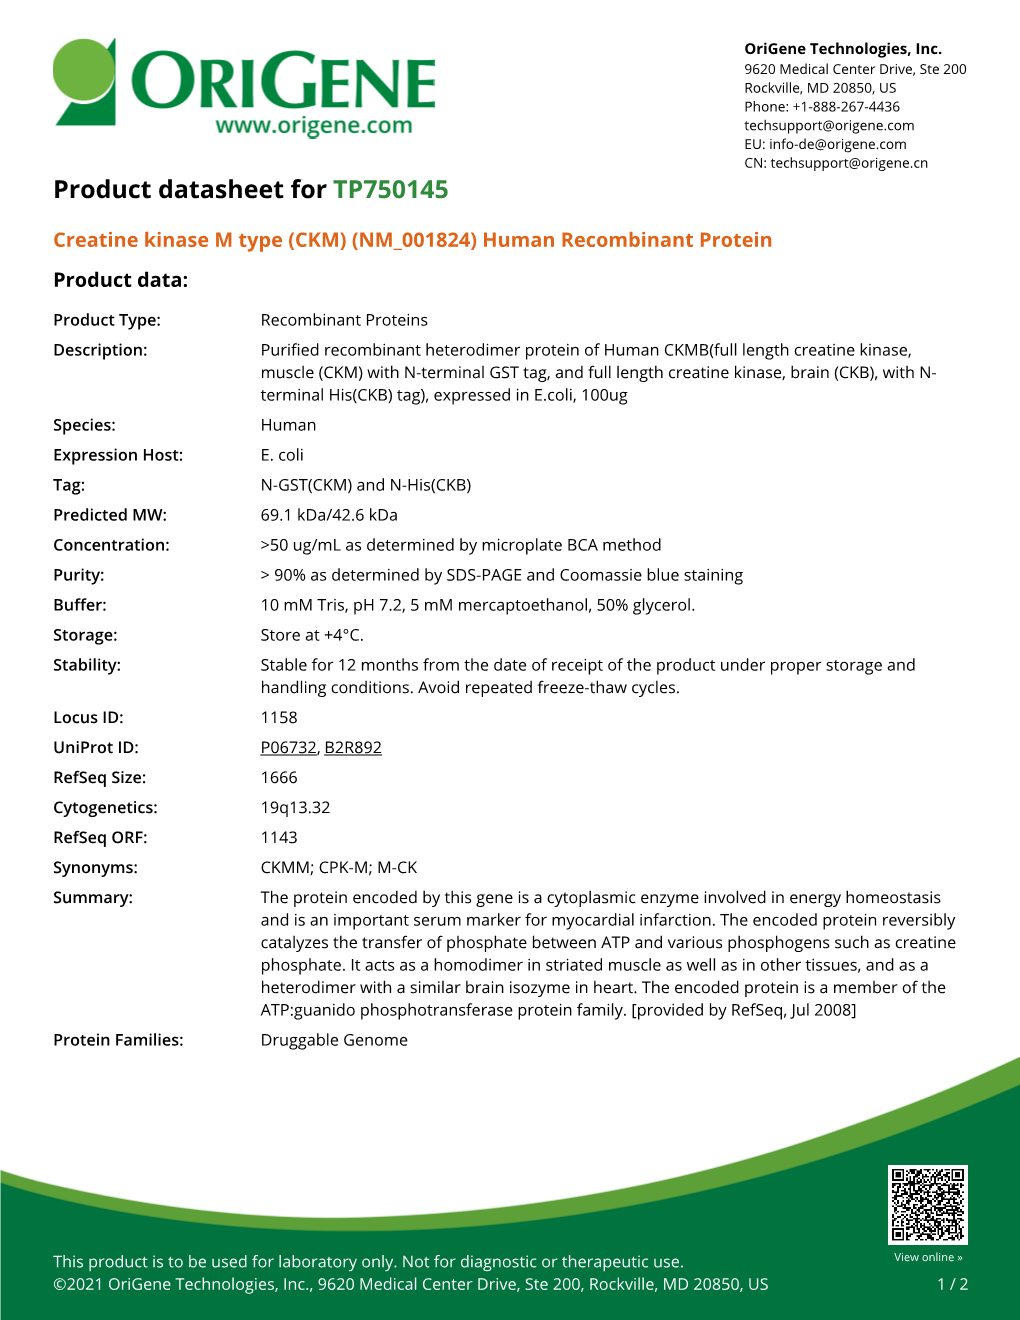 Creatine Kinase M Type (CKM) (NM 001824) Human Recombinant Protein Product Data